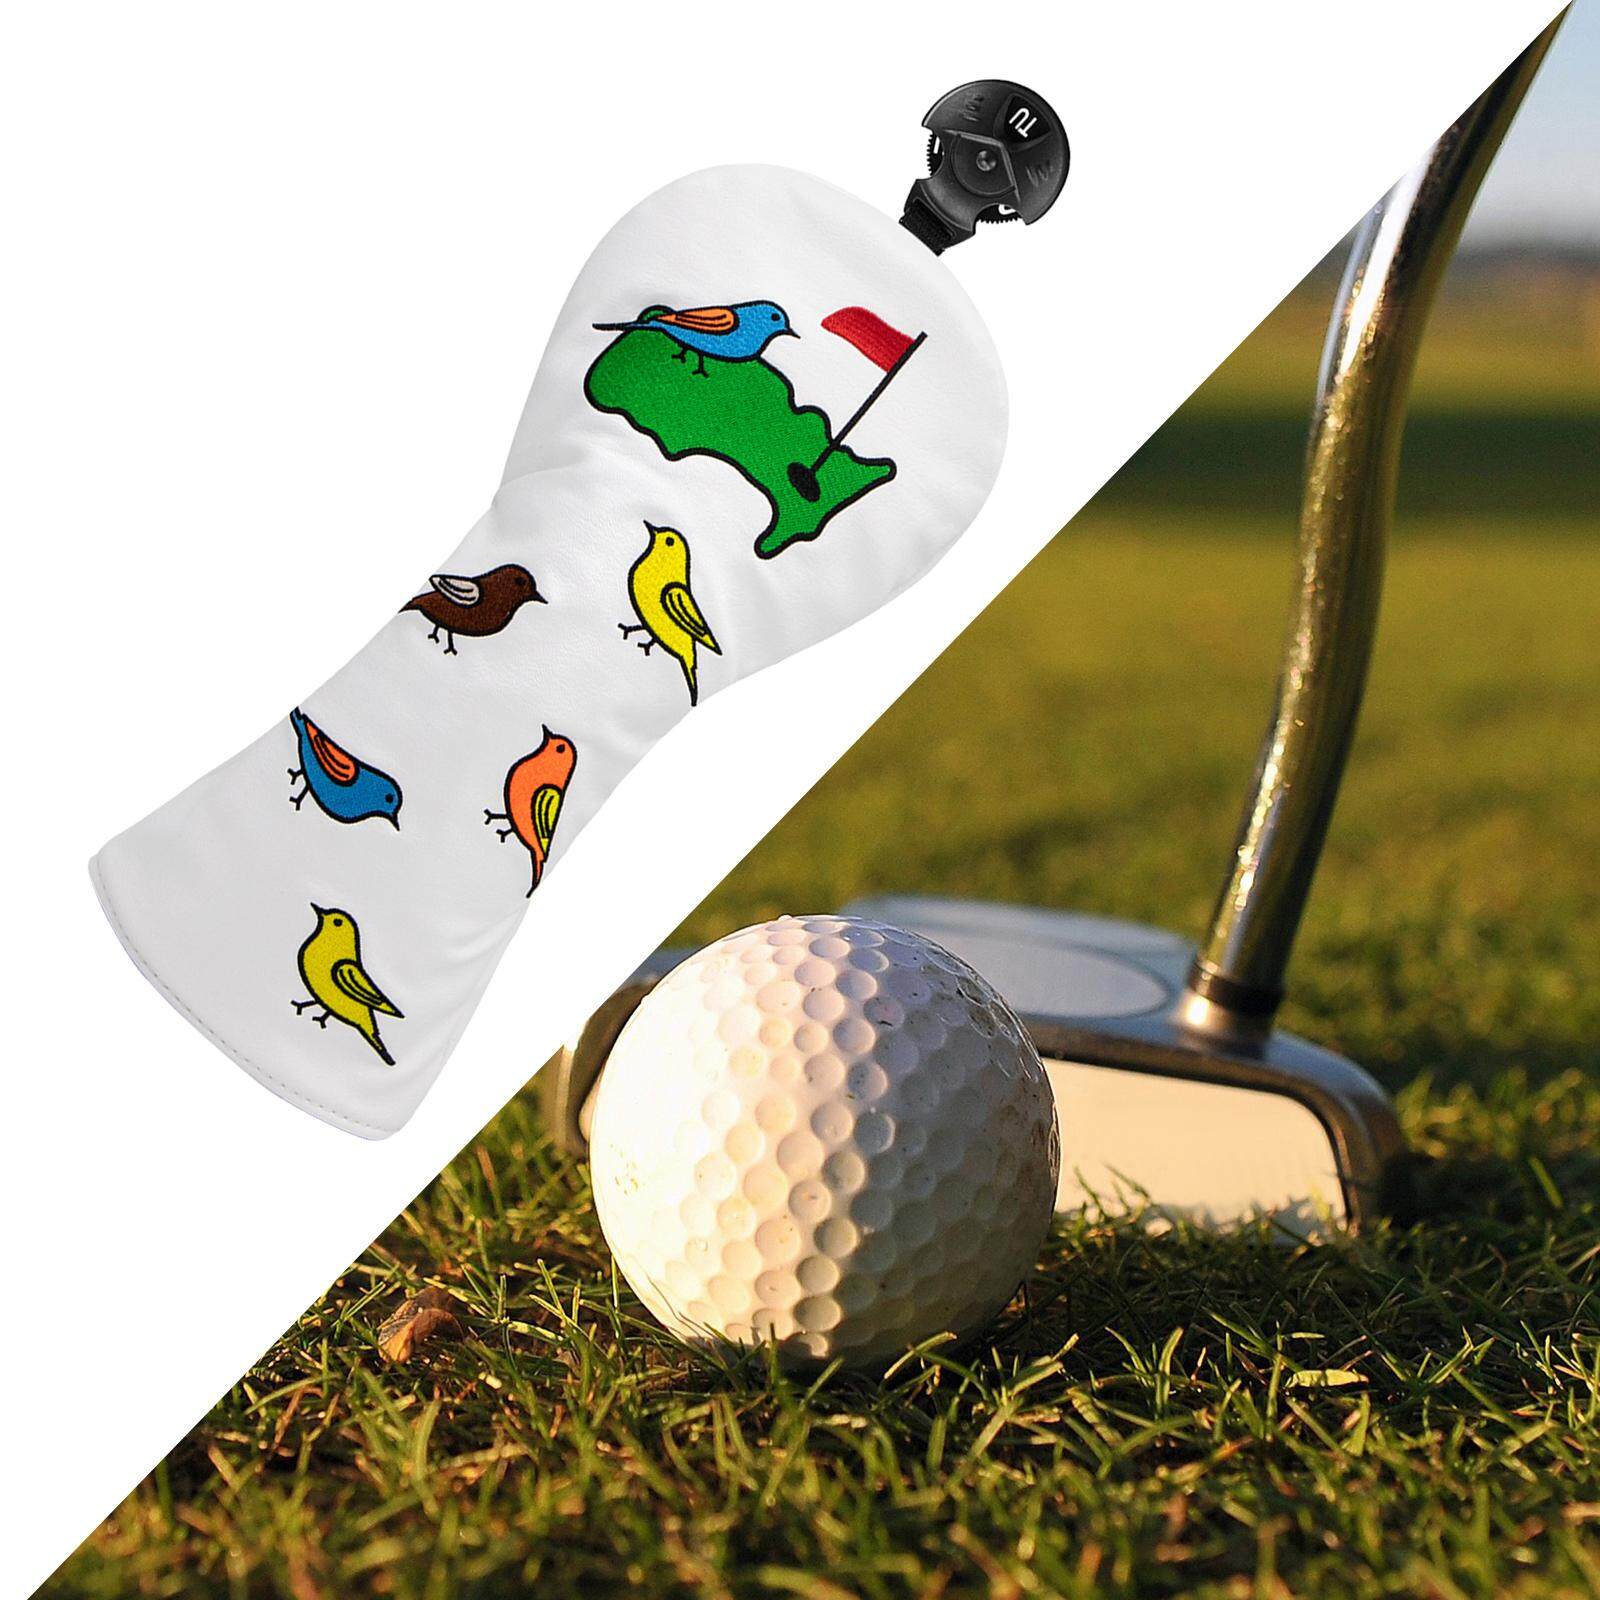 Moon ROCKET Durable Golf Wood Headcover with No. Tag Waterproof Case